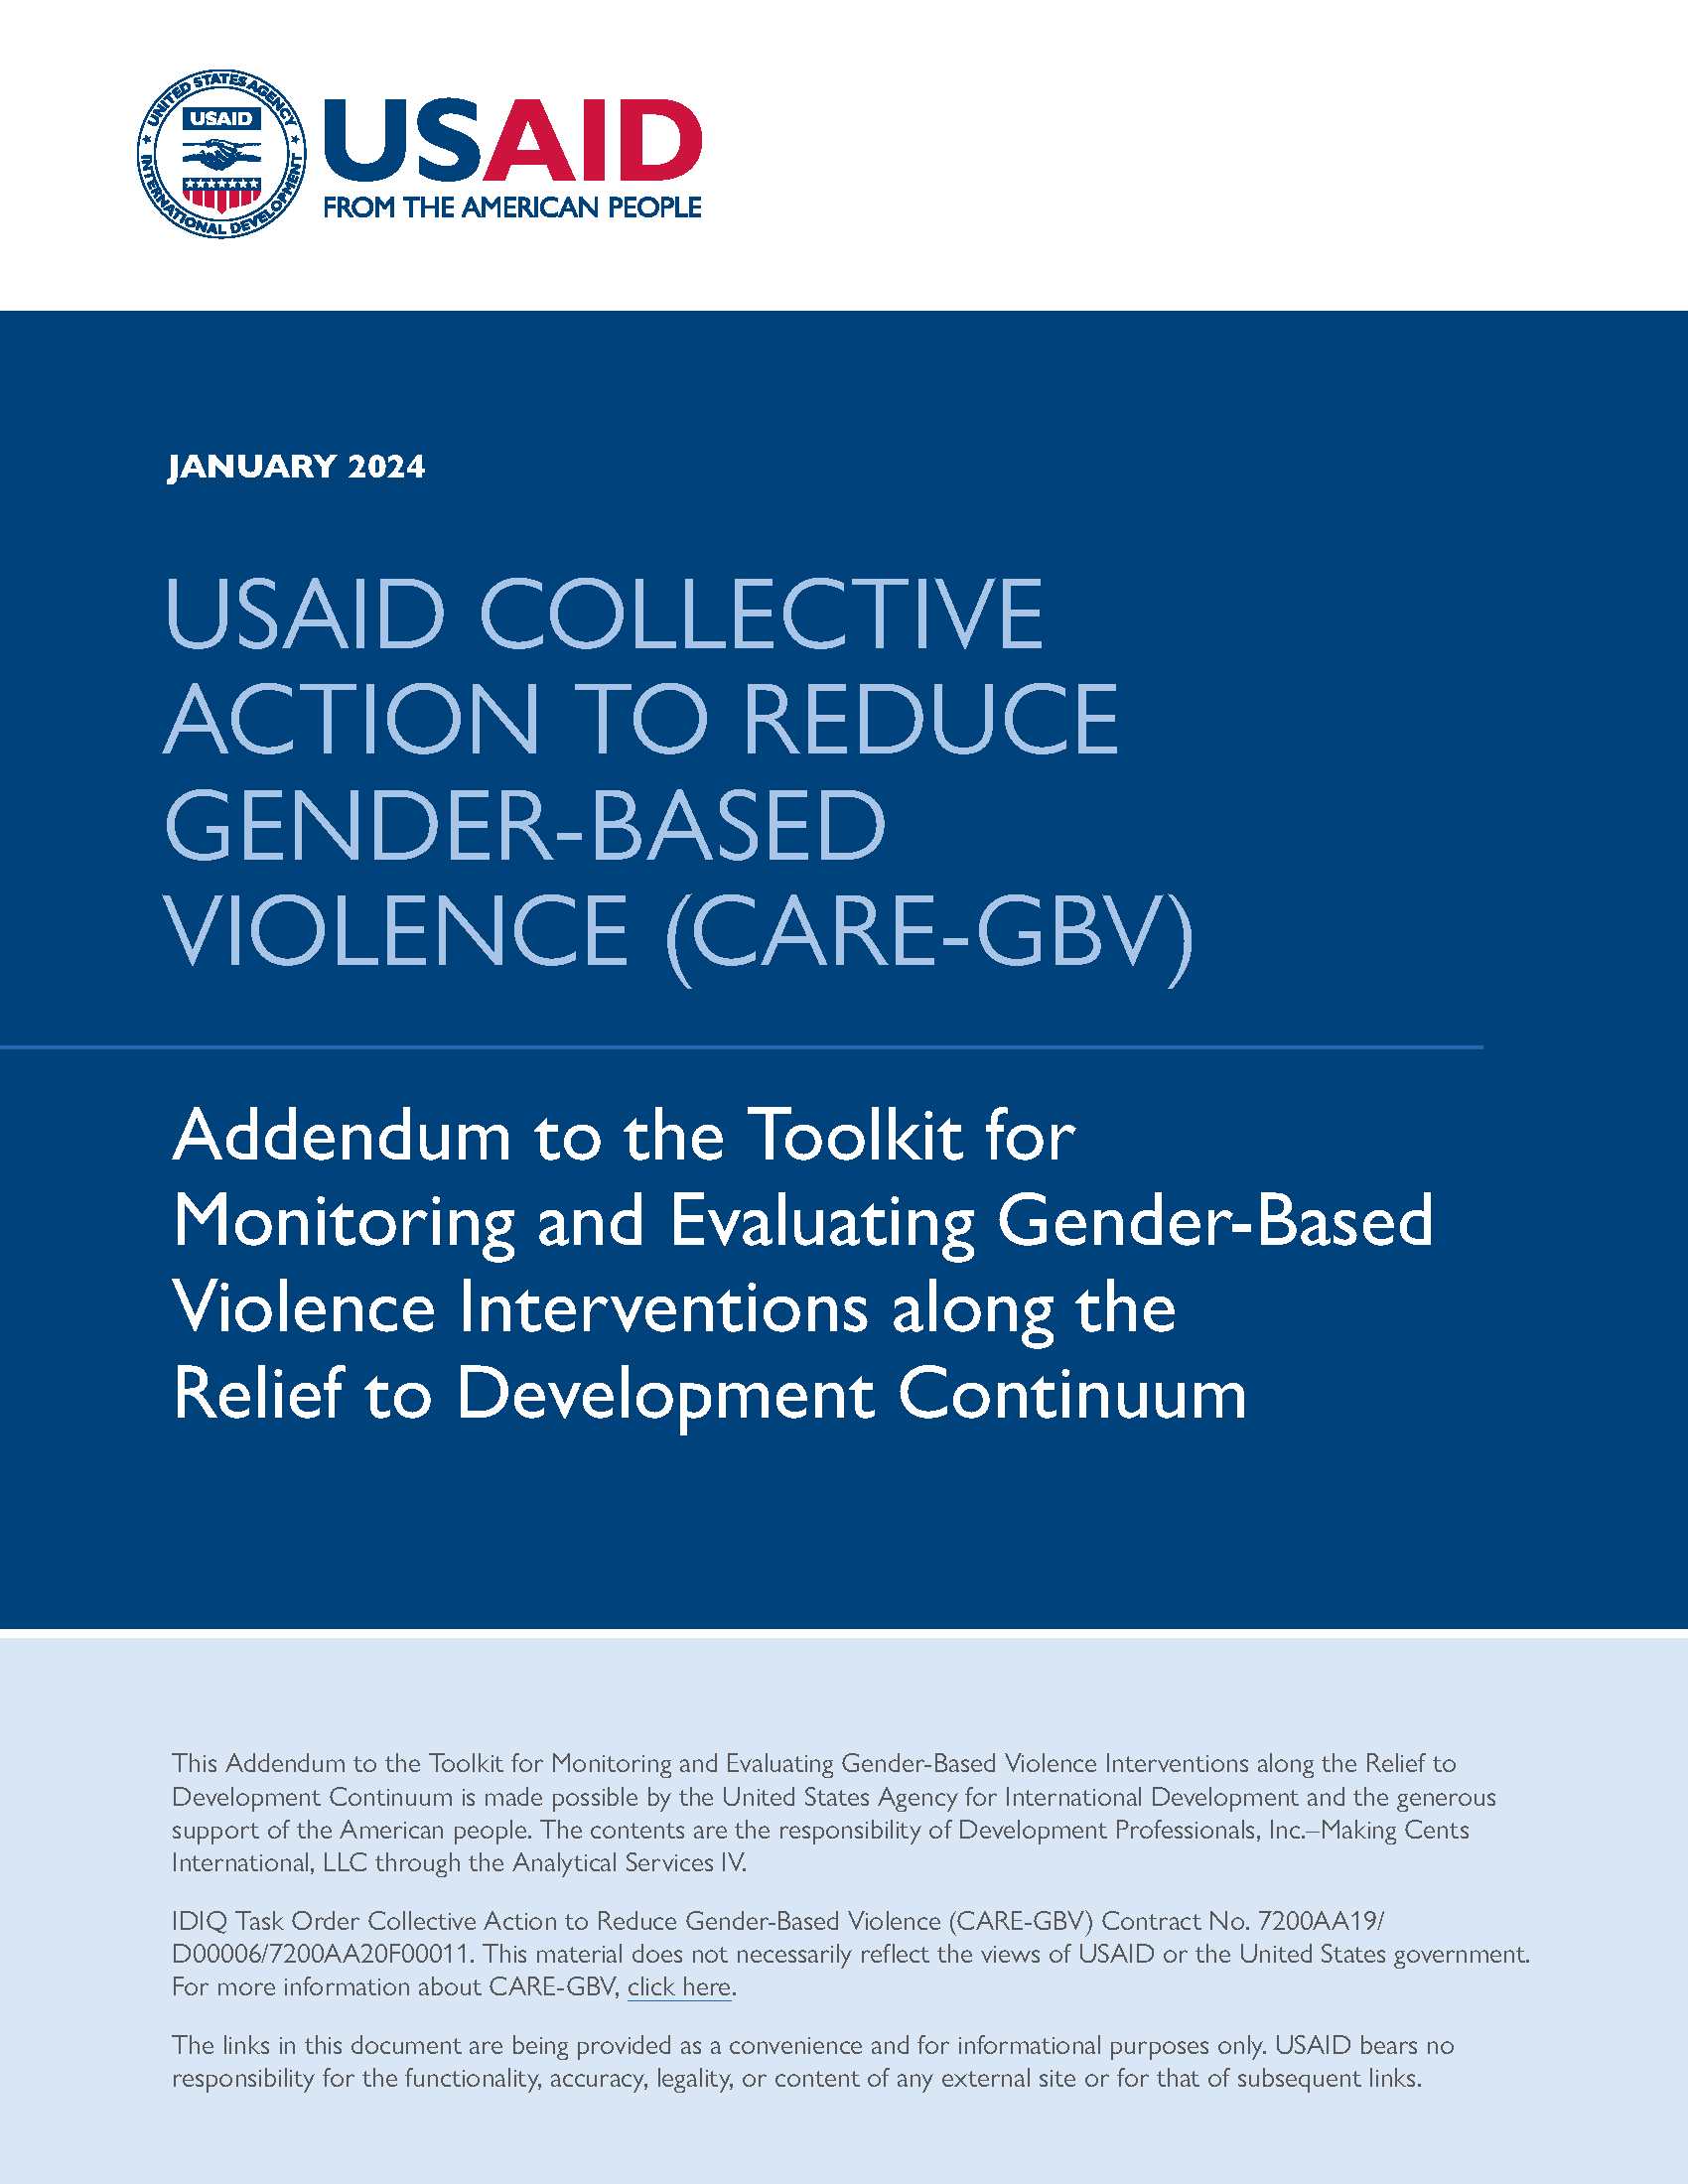 Cover page for Addendum to the Toolkit for Monitoring and Evaluating Gender-Based Violence Interventions along the Relief to Development Continuum